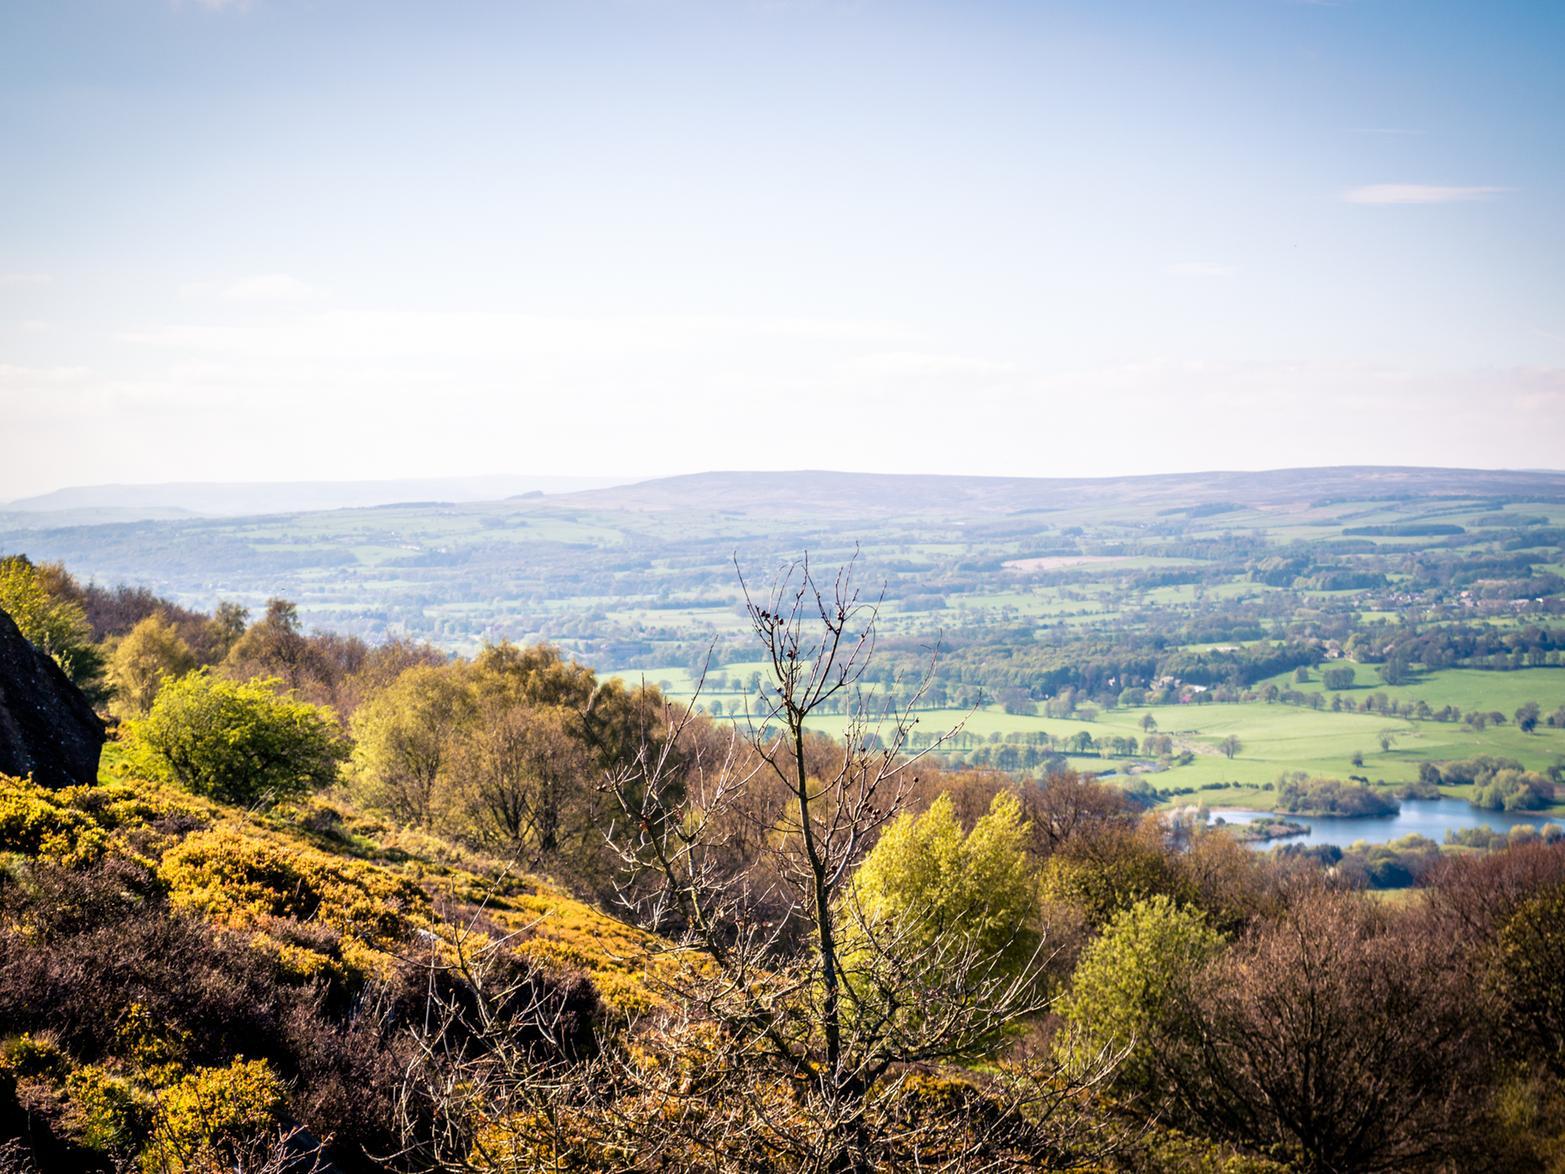 Ten miles north-west of Leeds city centre, this popular walking route overlooks the town of Otley and boasts a range of woodland paths, hilly routes and themed trails.